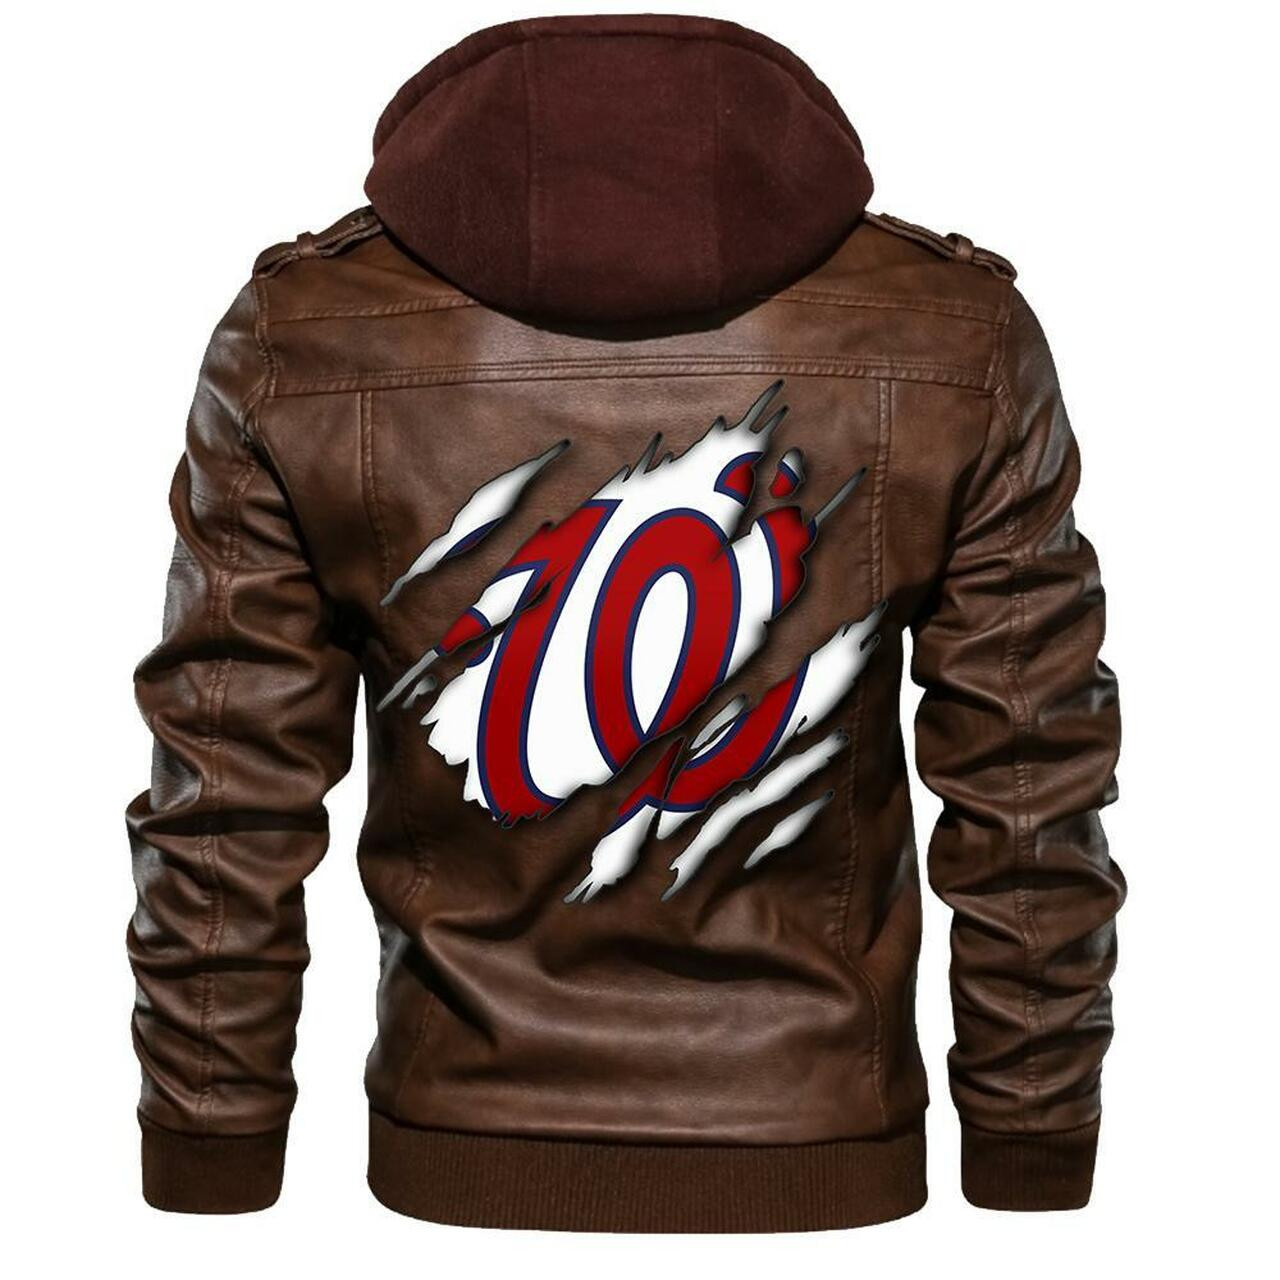 Top leather jacket can keep you warm on cooler days 219